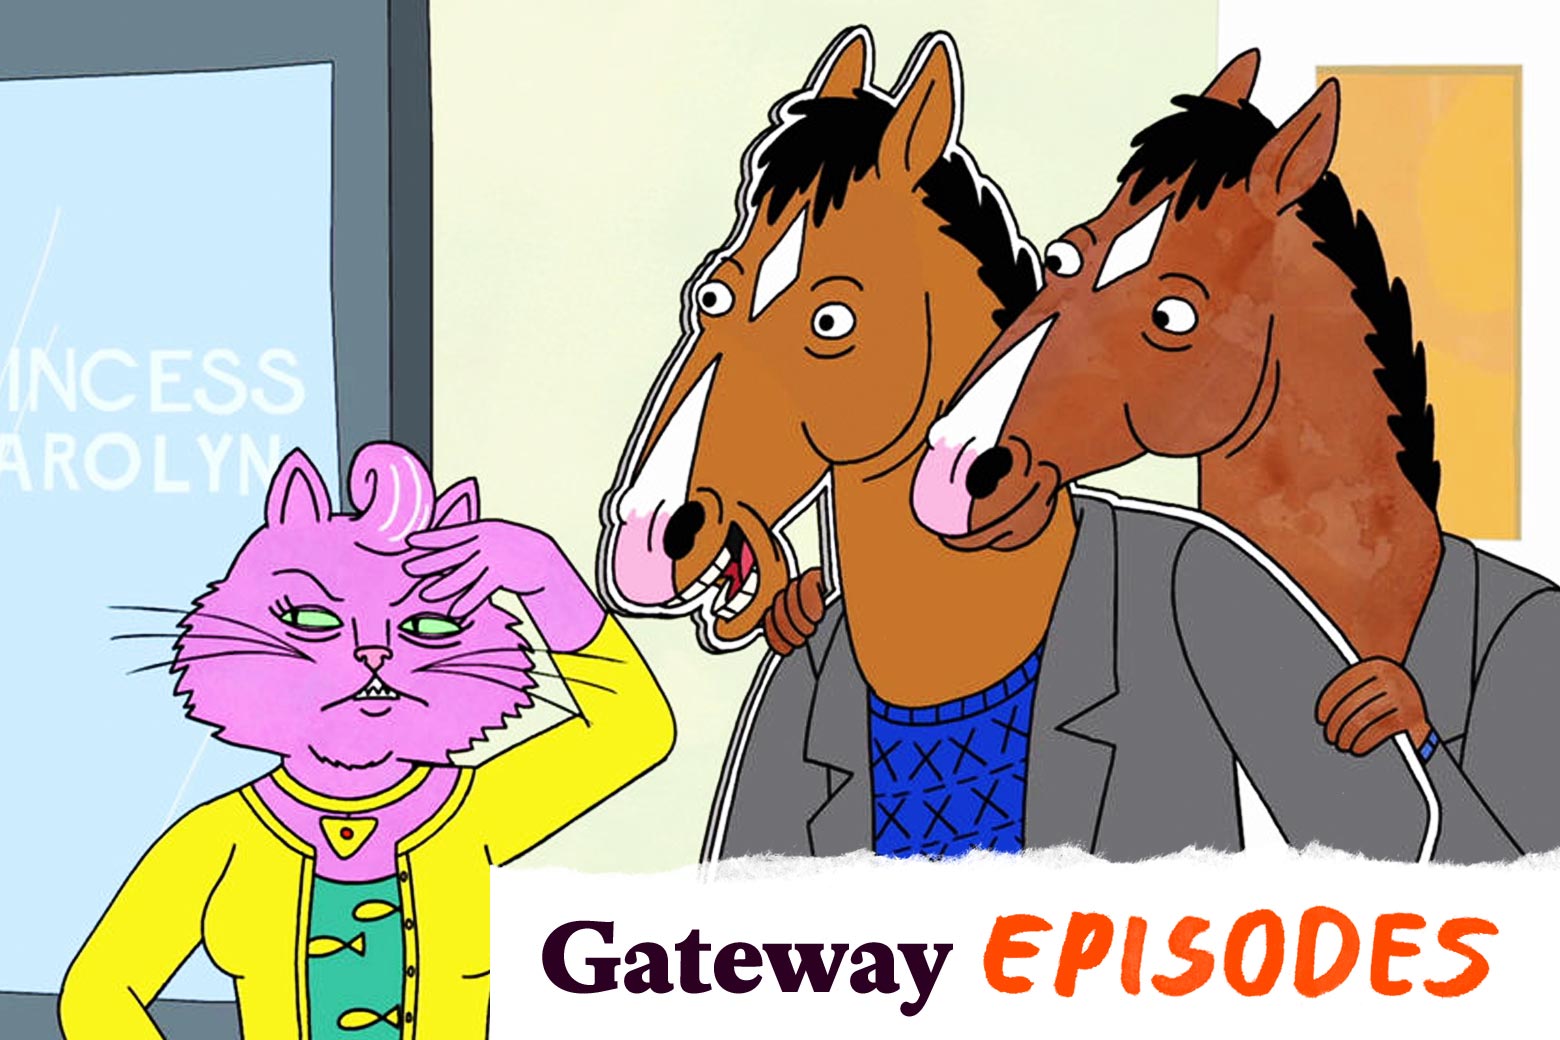 A scene from BoJack Horseman, in which the cat Princess Carolyn stands to the left with her hand on her head, while BoJack stands to right holding a cardboard cutout of himself